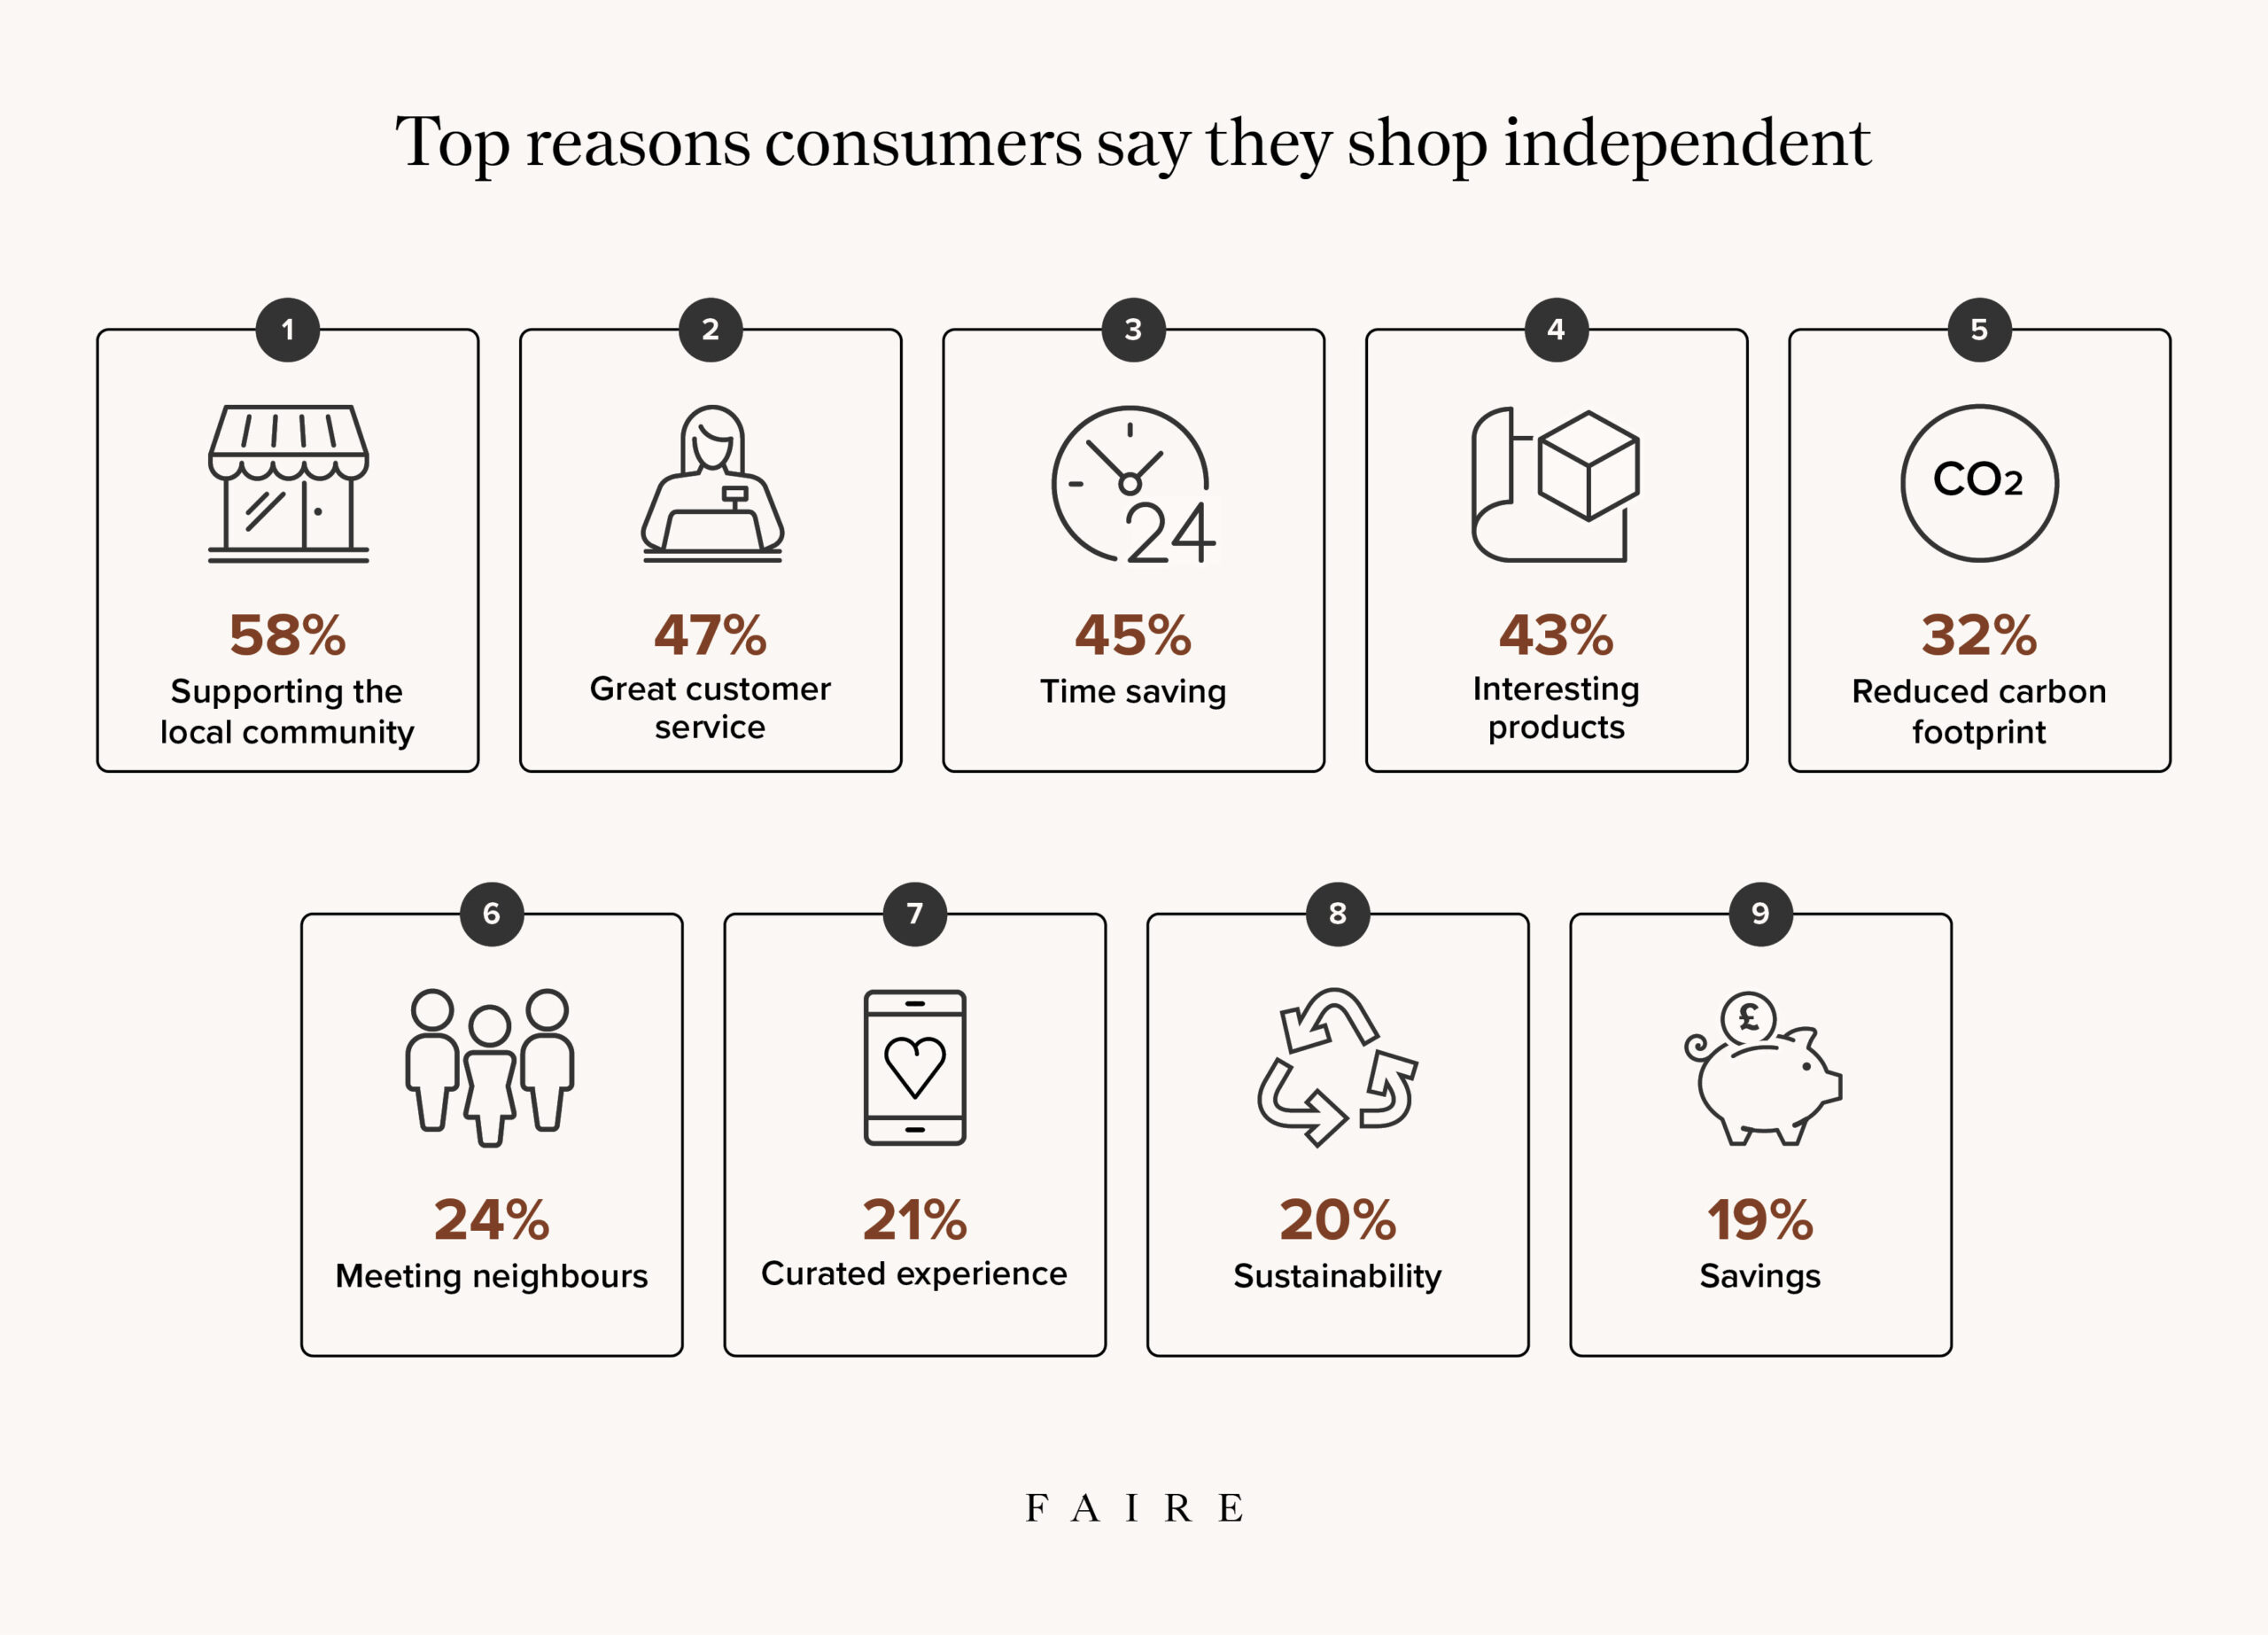 An infographic showing the top reasons consumers say they shop independent